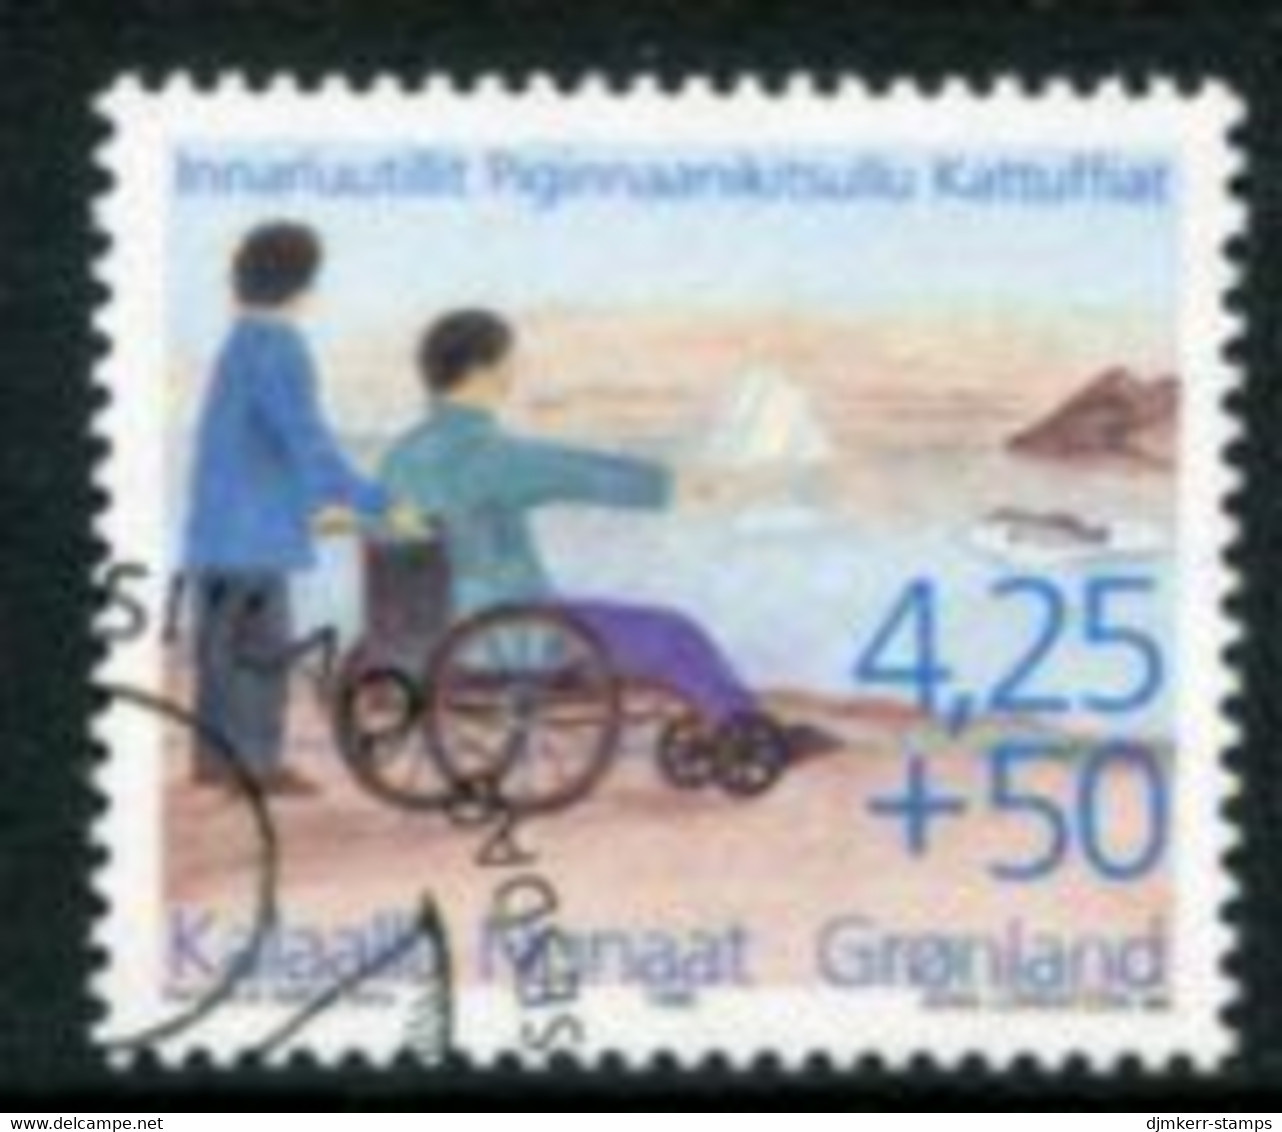 GREENLAND 1996 Society For The Disabled Used  Michel 296 - Usati